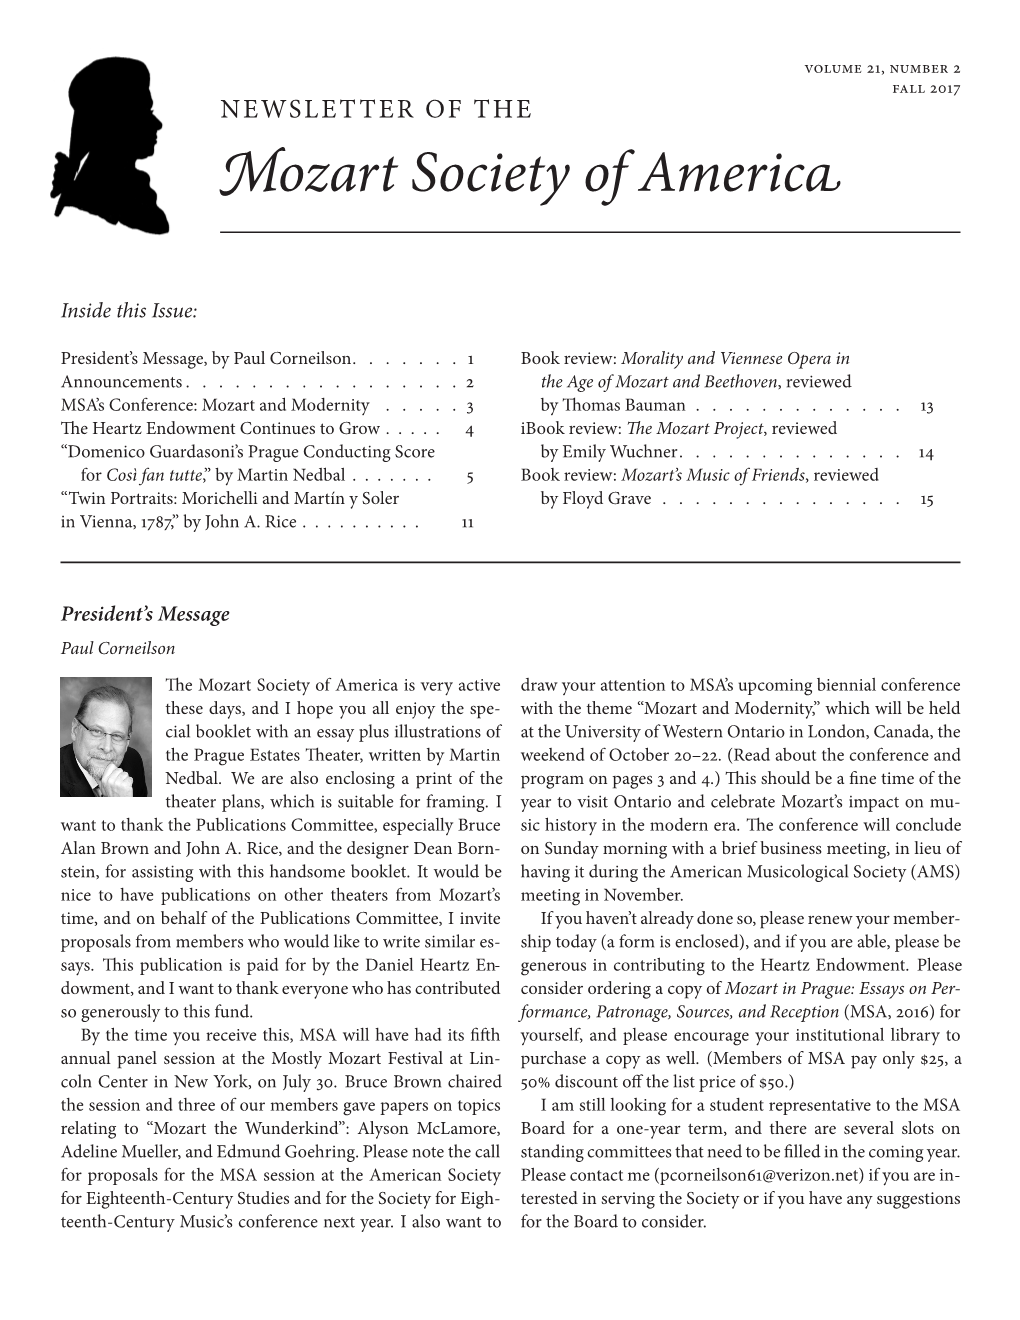 Fall 2017 NEWSLETTER of the Mozart Society of America